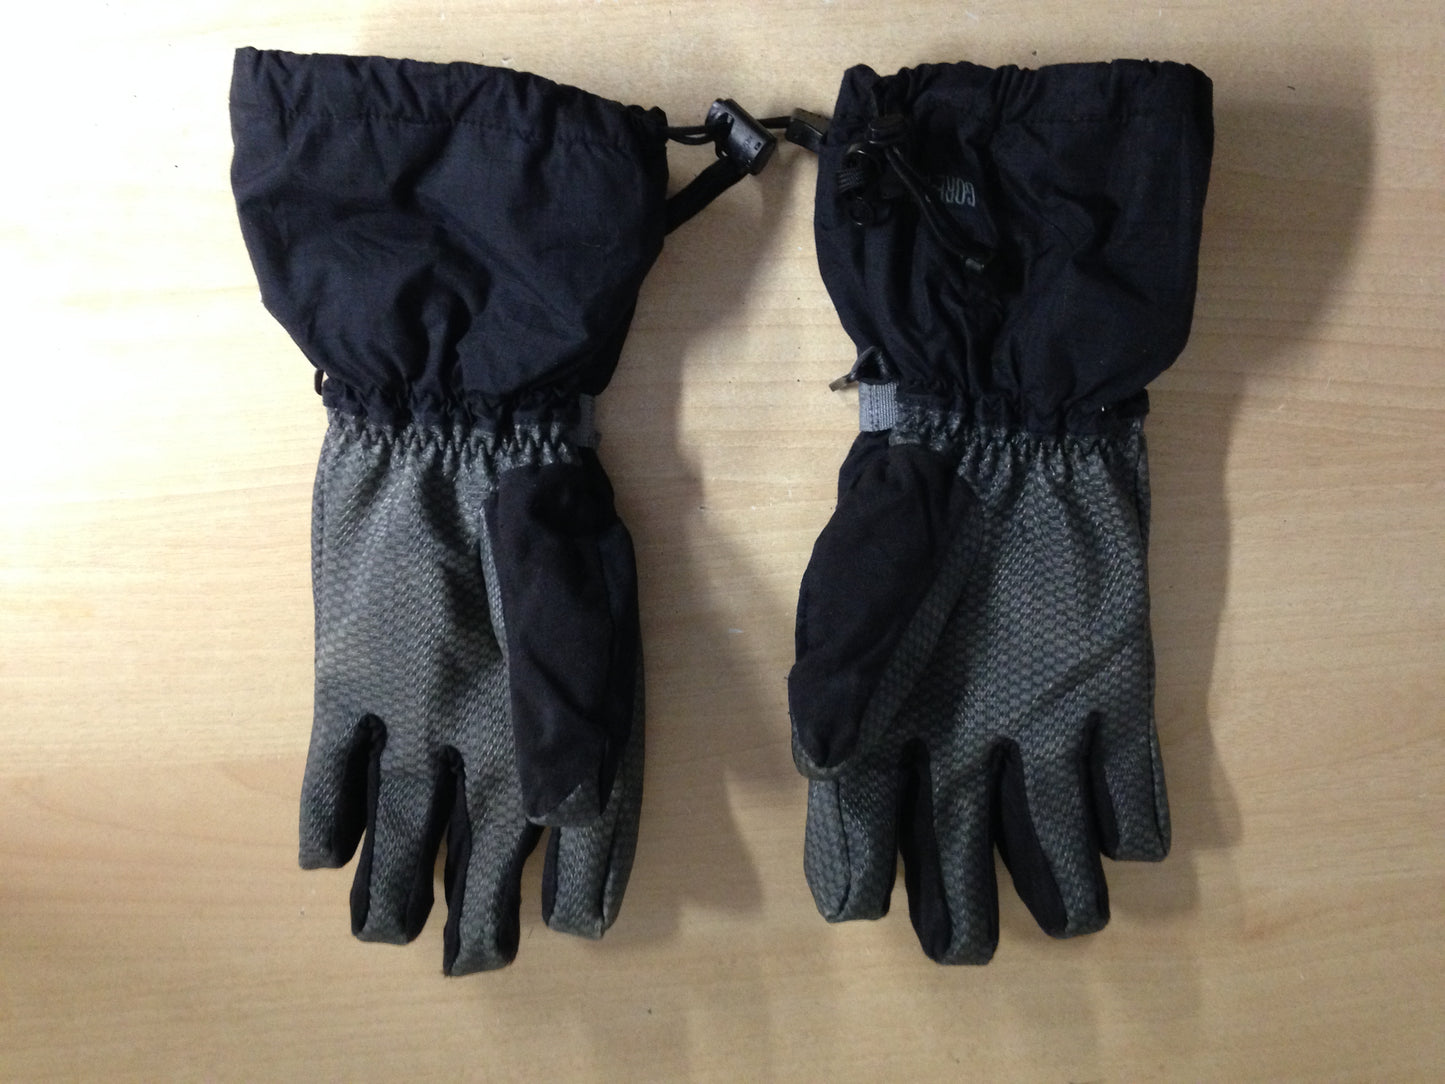 Winter Gloves and Mitts Men's Size Medium MEC Gore-Tex Waterproof With Liner Black